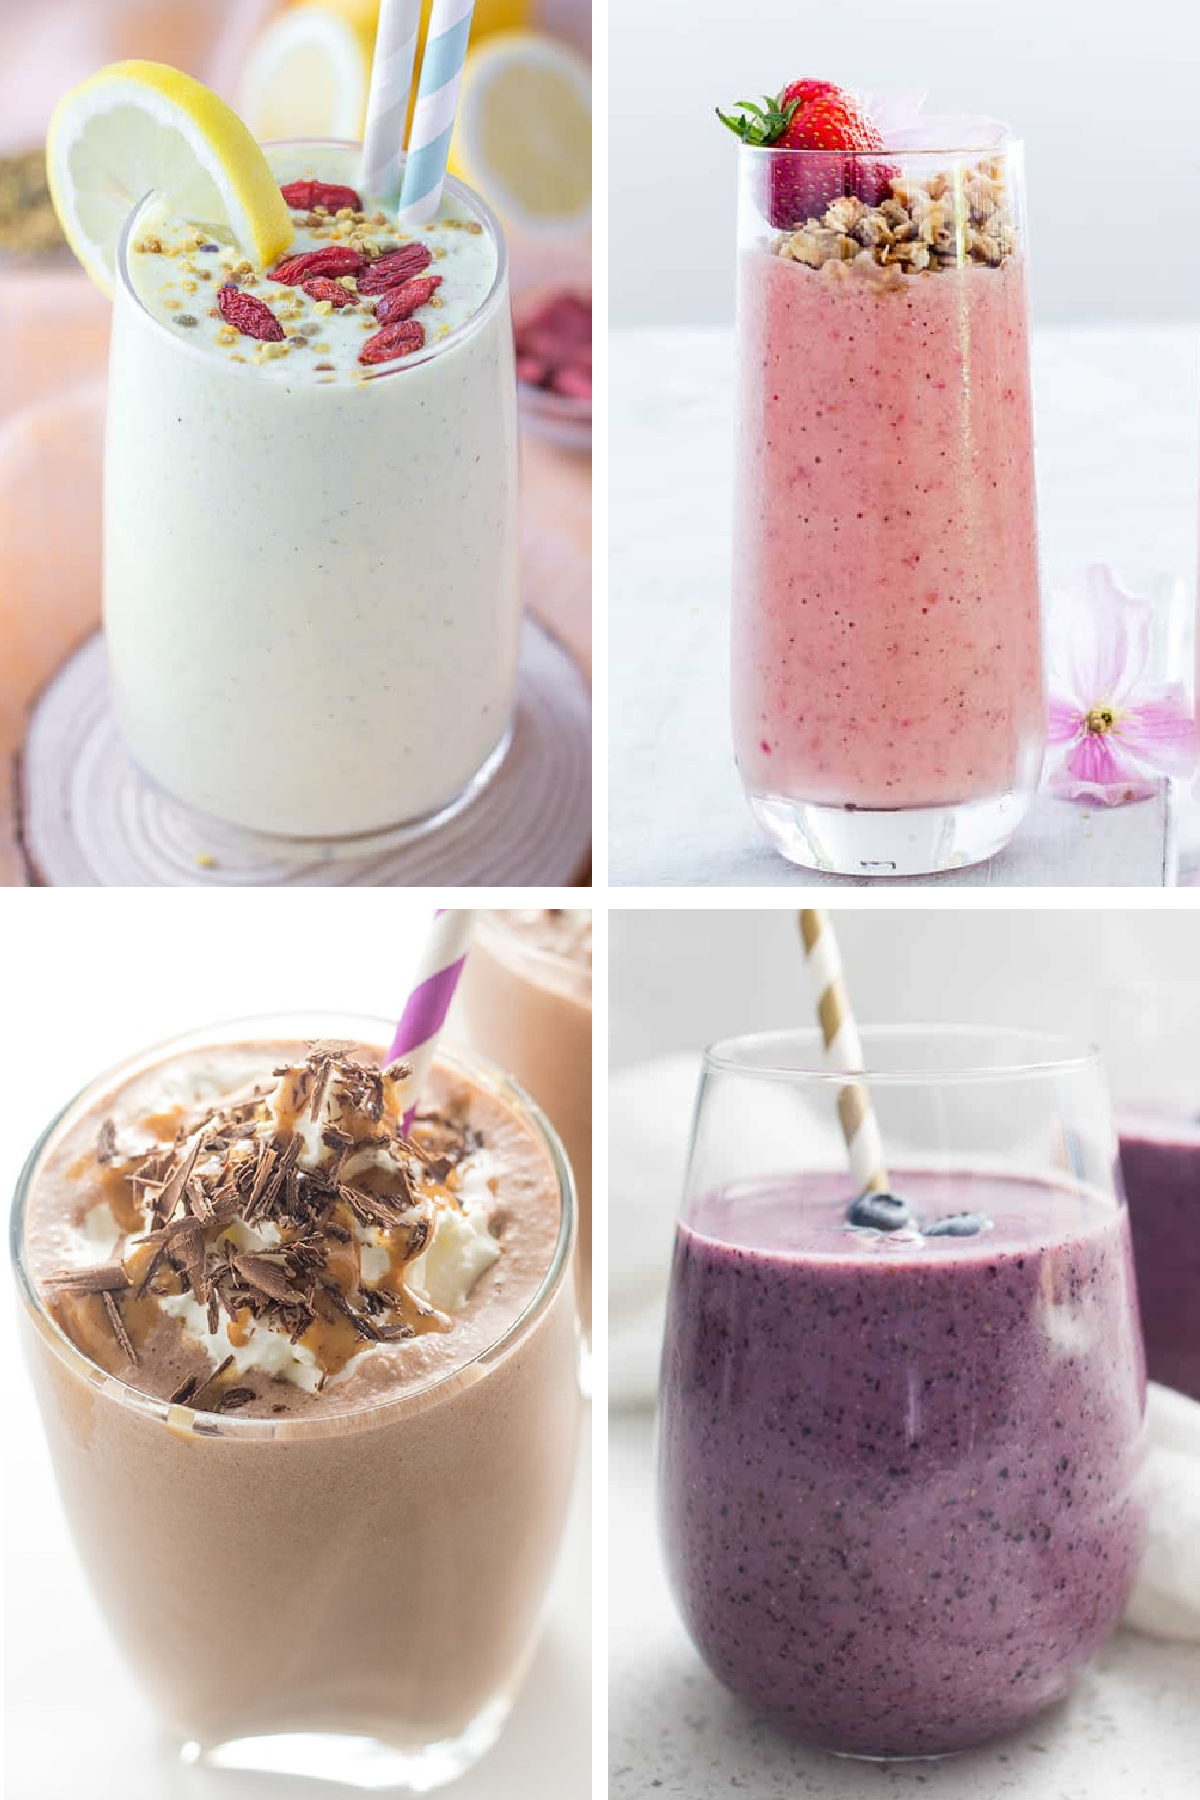 Four varieties of smoothies with assorted toppings and garnishes.